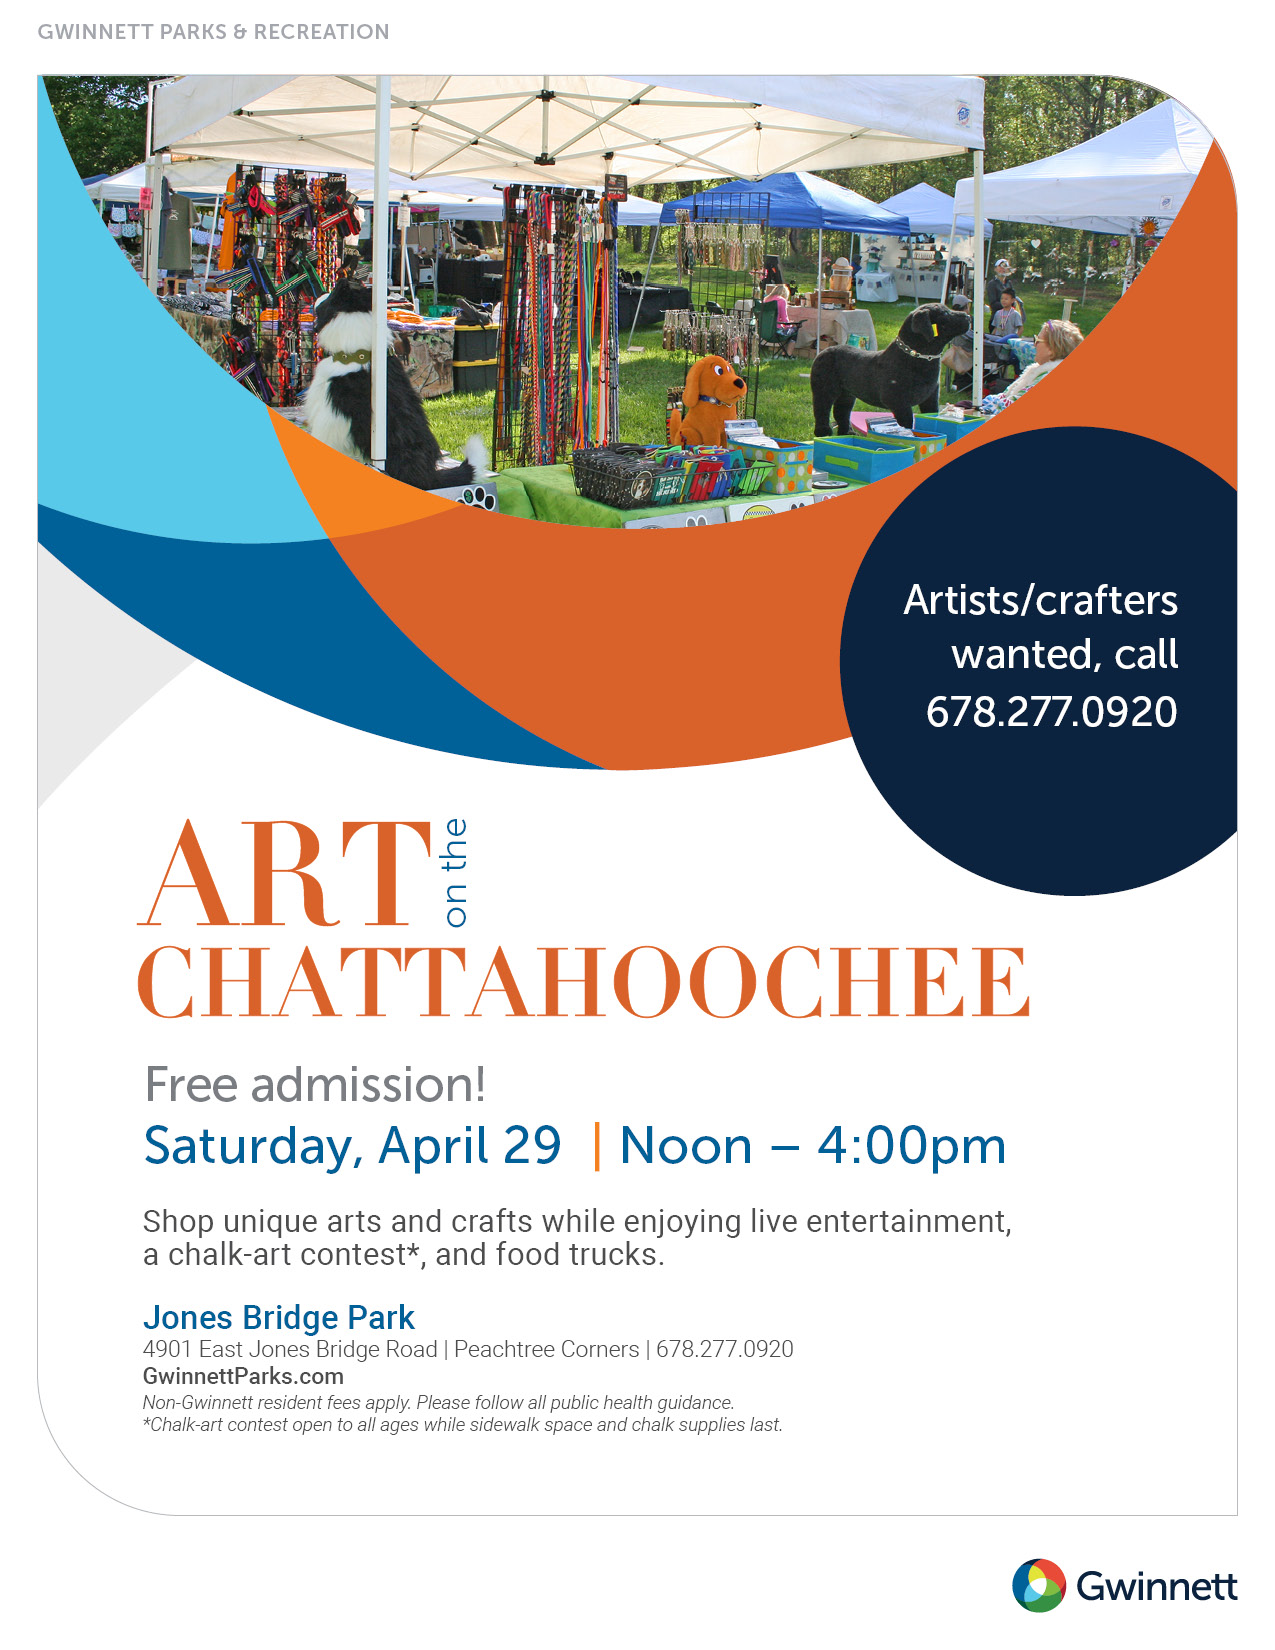 Art on the Chattahoochee FREE to Attend Ready Set